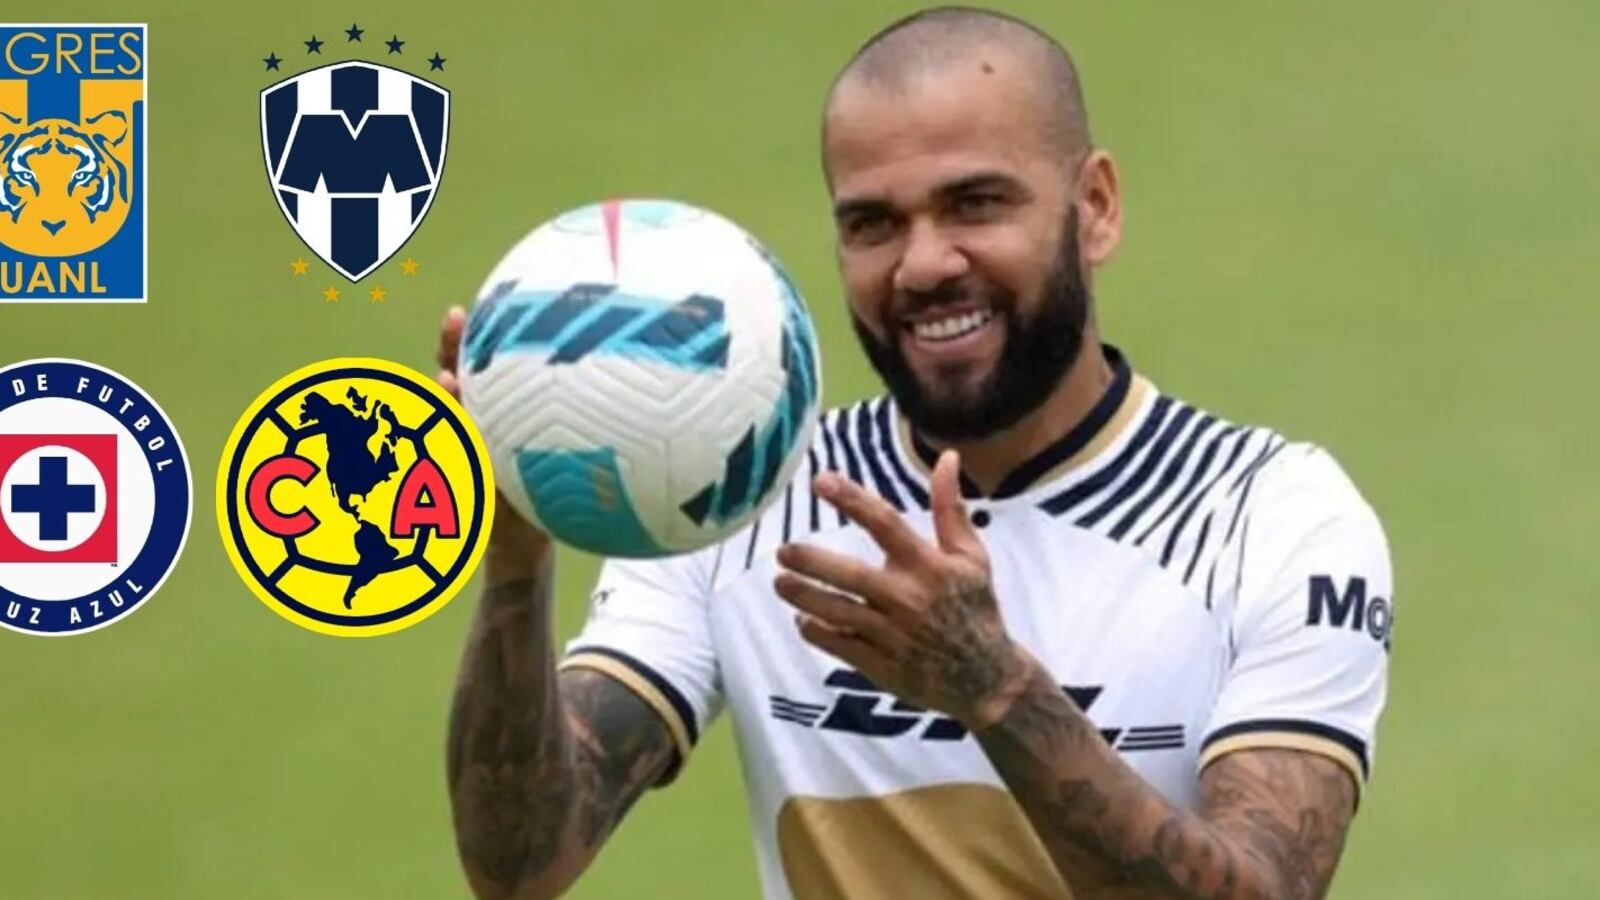 The club that can bring Dani Alves back to Mexico after his release from prison